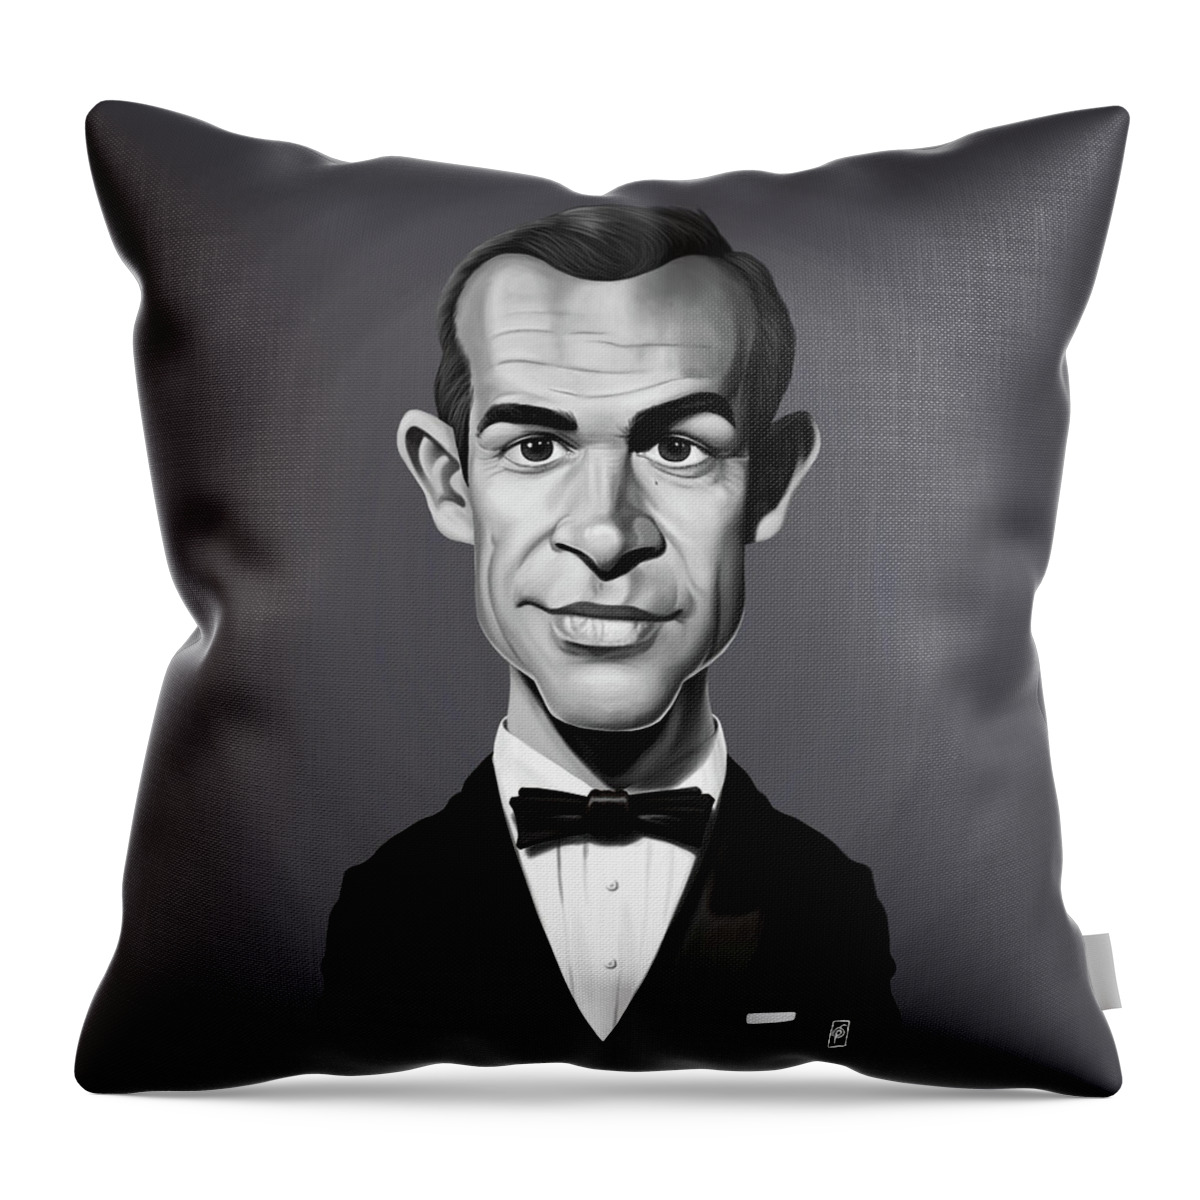 Illustration Throw Pillow featuring the digital art Celebrity Sunday - Sean Connery by Rob Snow